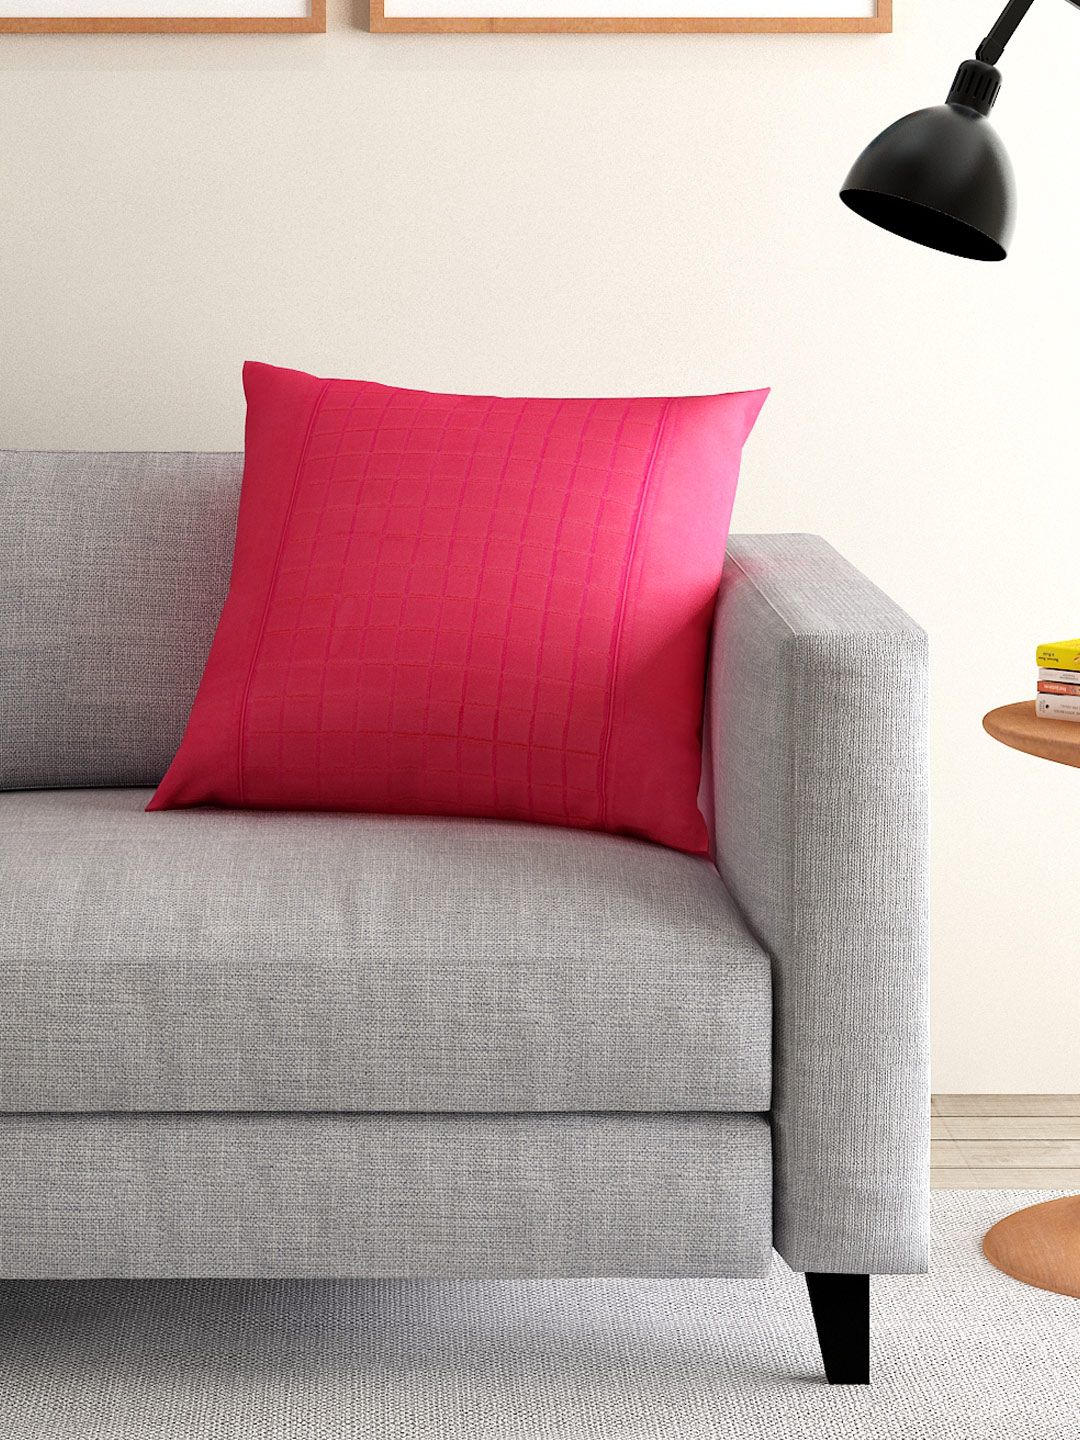 ANS Pink Dual-Toned Single Checked 16'' x 16'' Square Cushion Cover Price in India